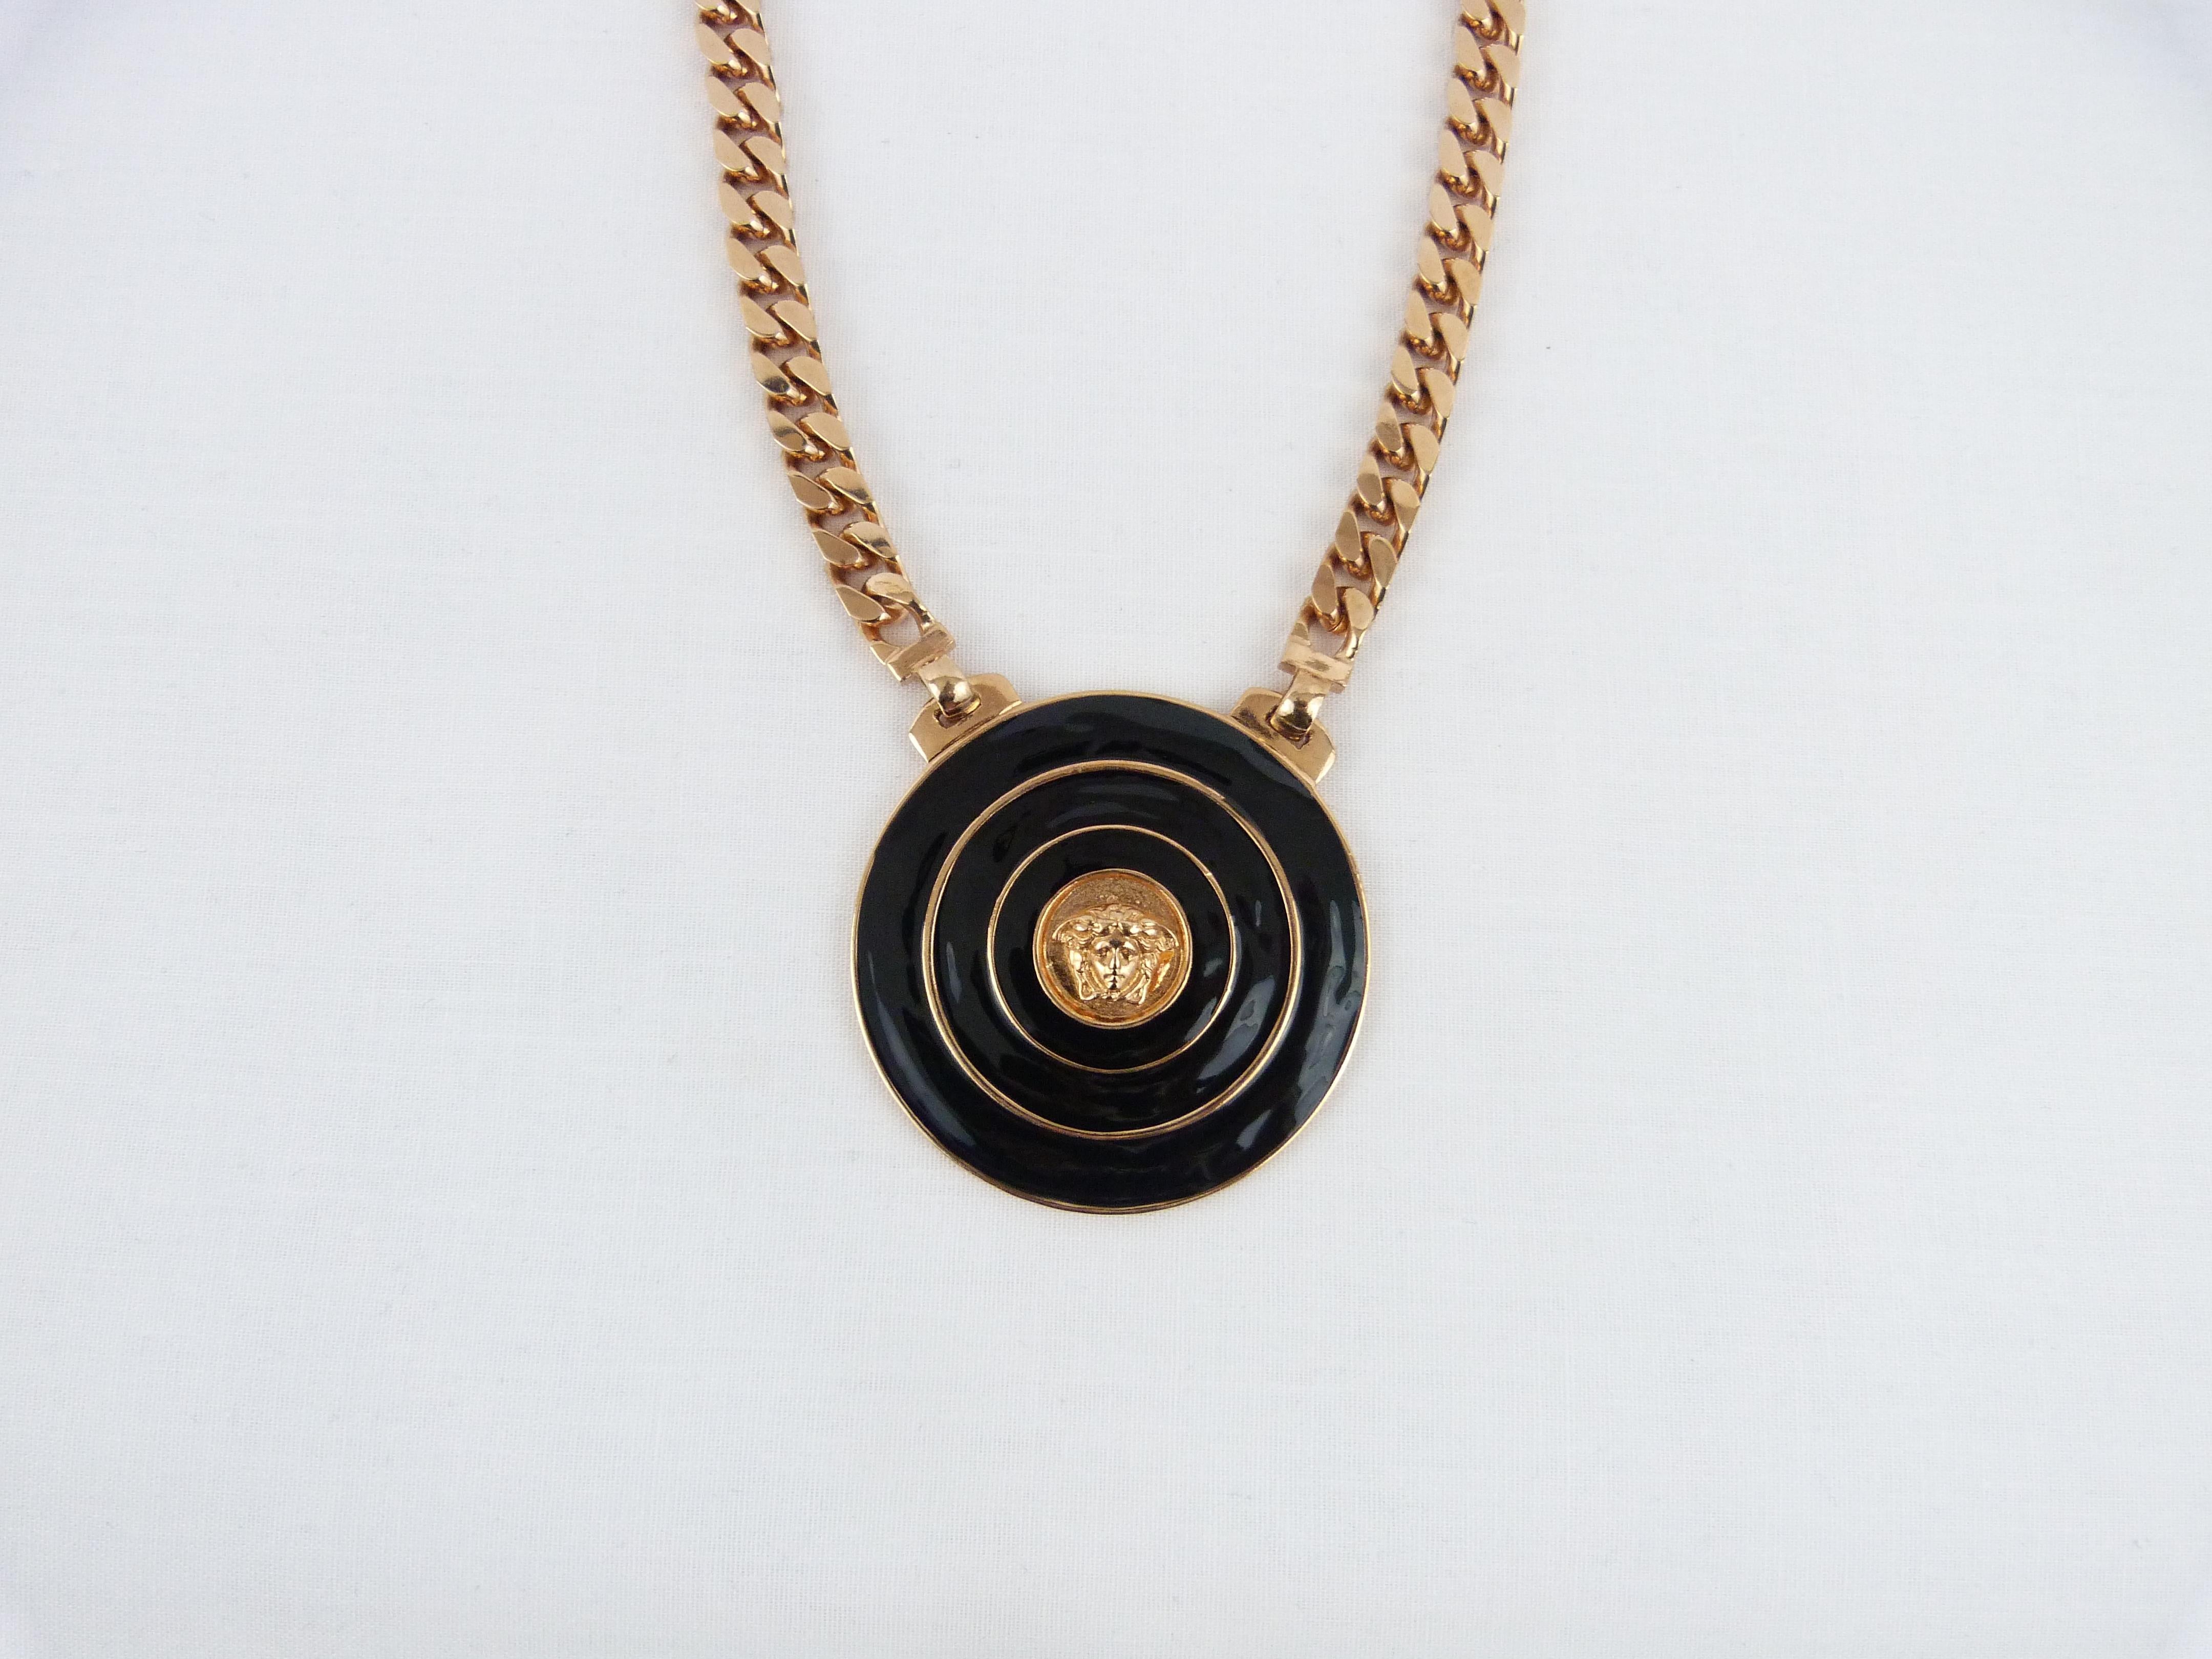 This Gianni Versace rose gold chain is a great statement piece to have for any Gianni Versace enthusiast. 